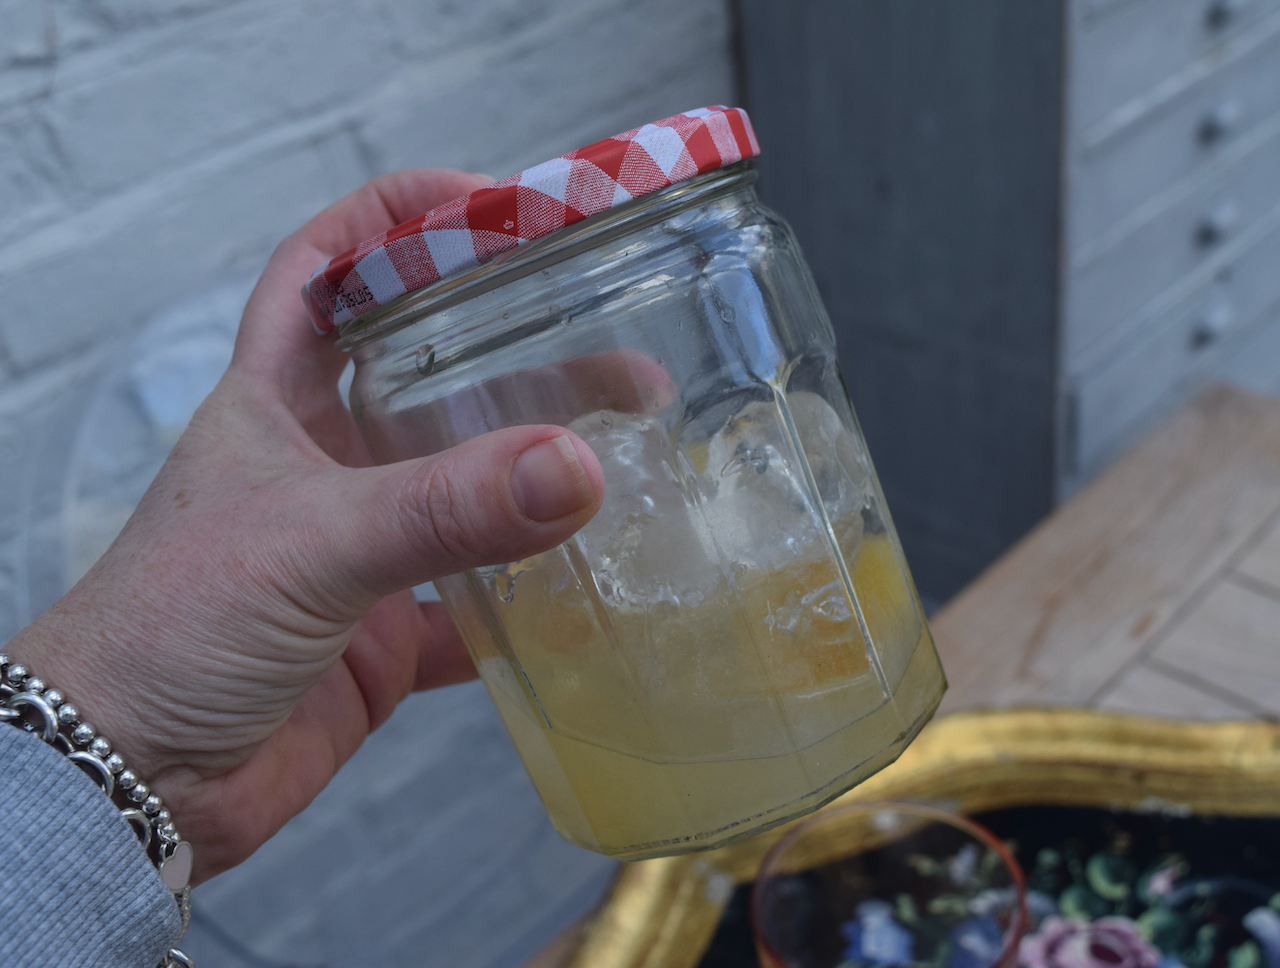 Lemon Curd Gimlet recipe from Lucy Loves Food Blog